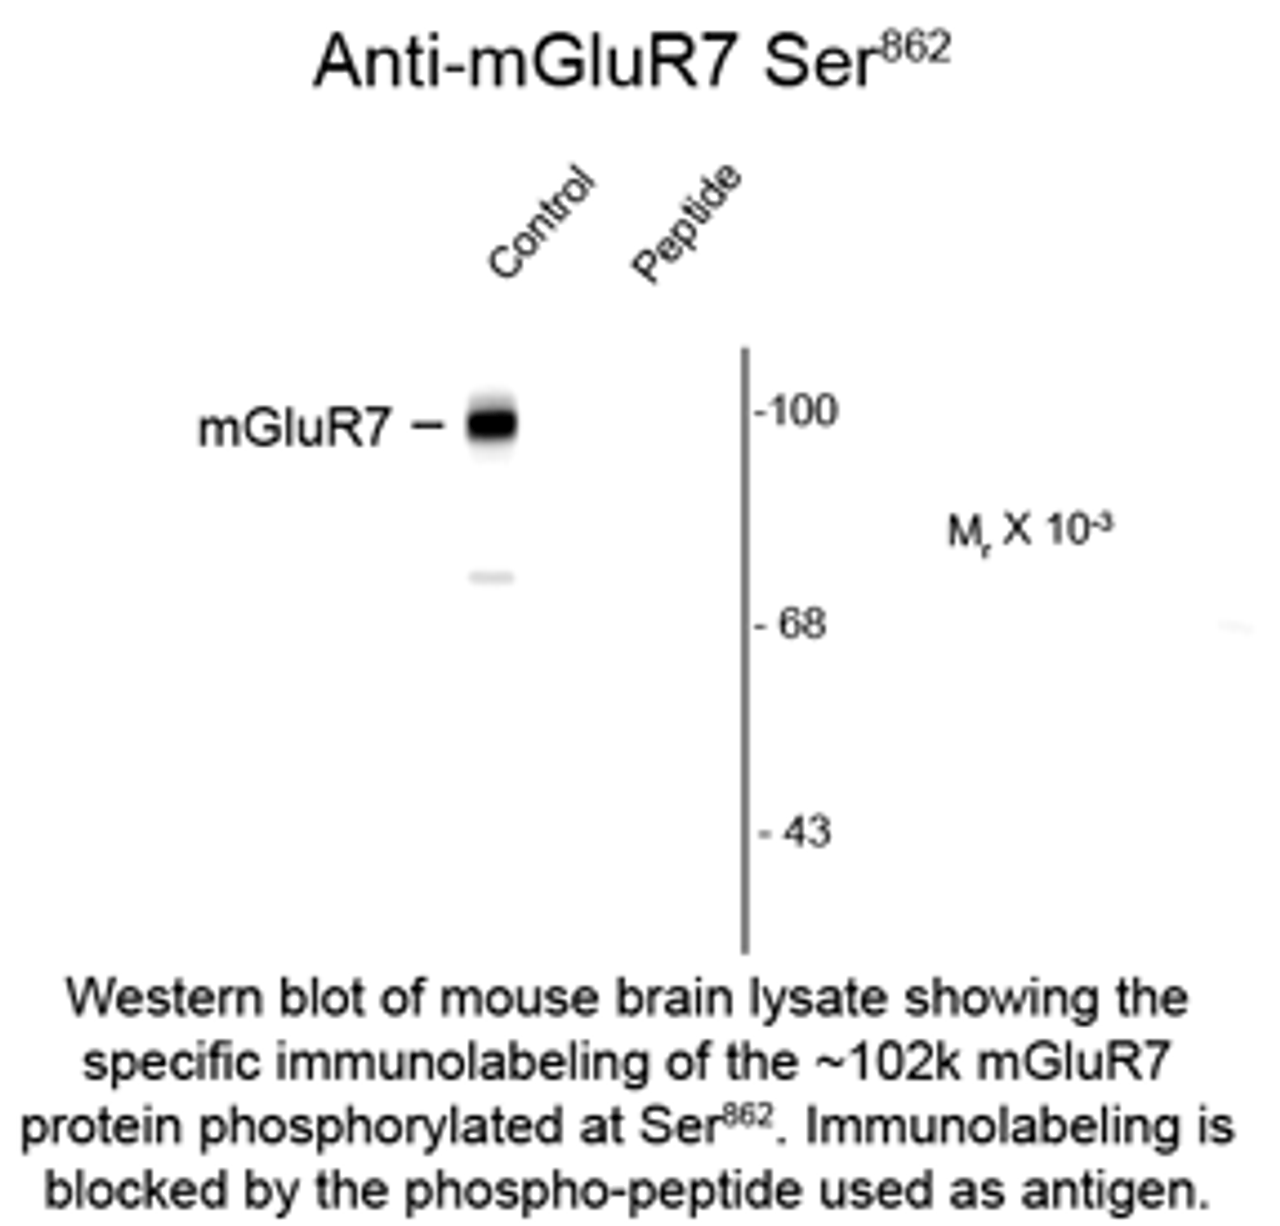 Western blot of mouse brain lysate showing the specific immunolabeling of the ~102k mGluR7 protein phosphorylated at Ser862. Immunolabeling is blocked by the phospho-peptide used as antigen.